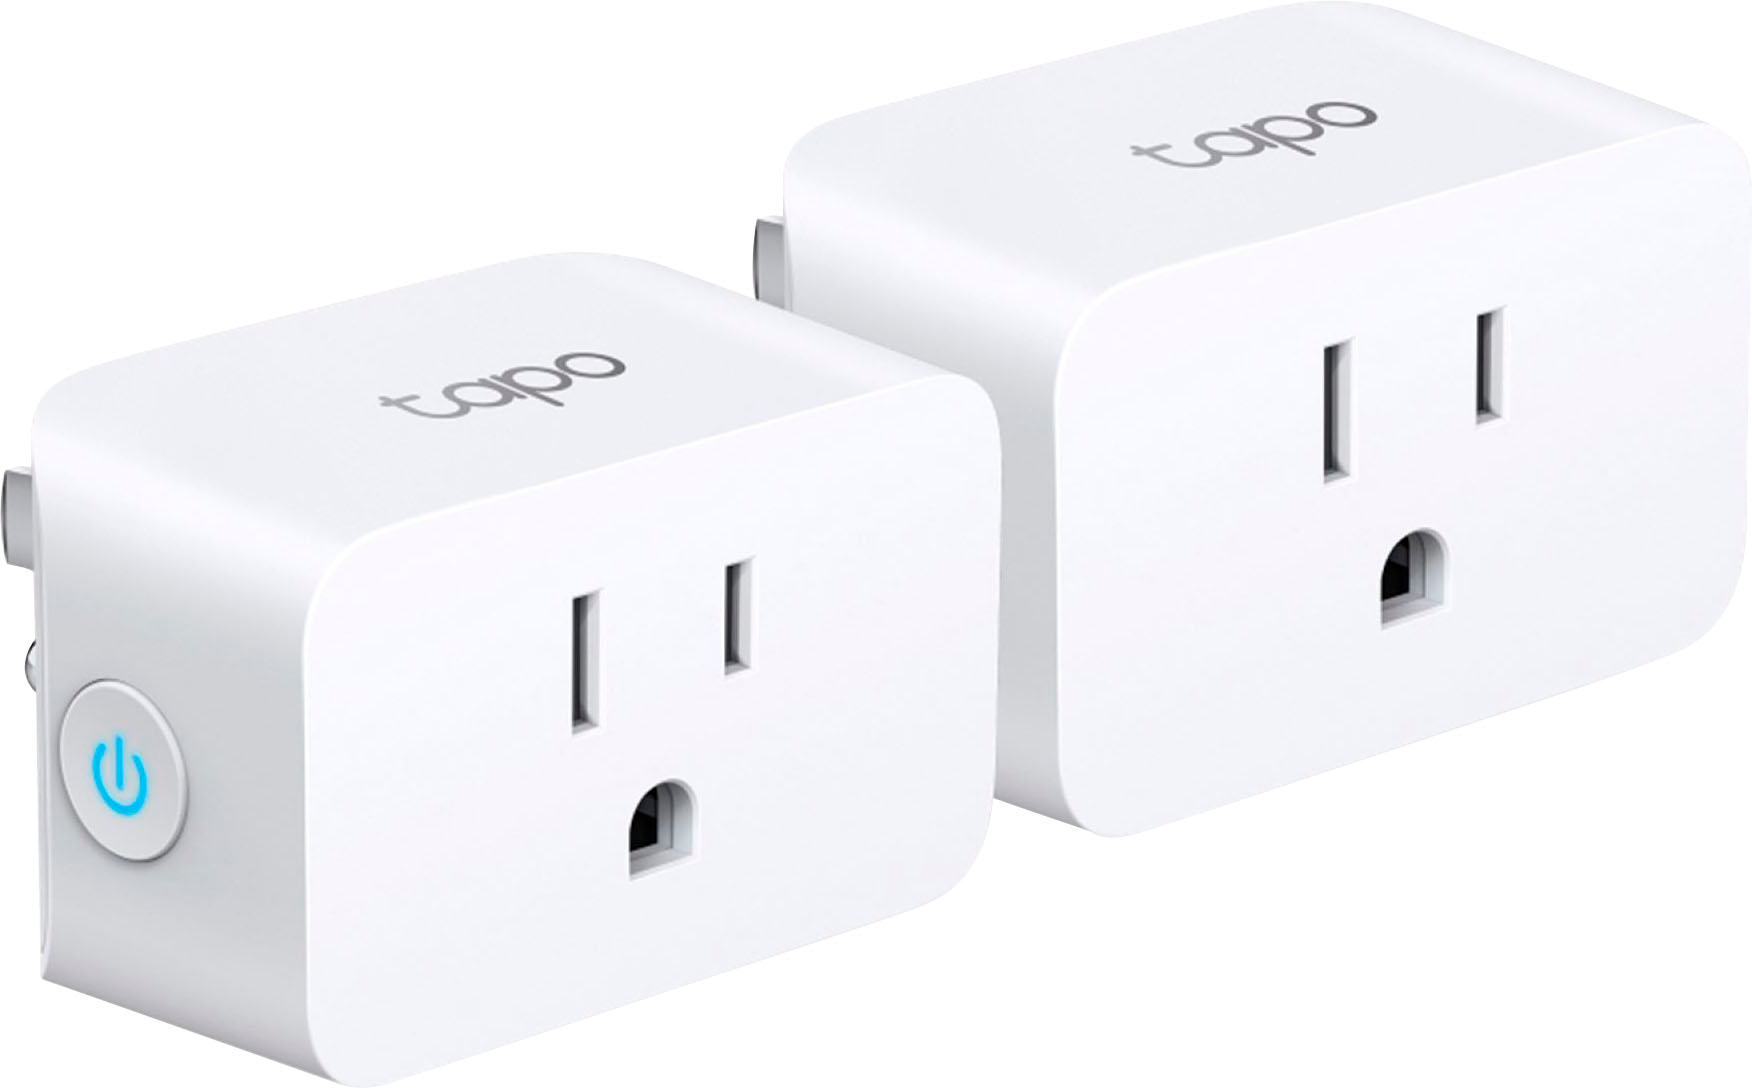 4 x TP-Link Tapo Smart Plug WiFi Outlet Works with  Alexa & Google  Home